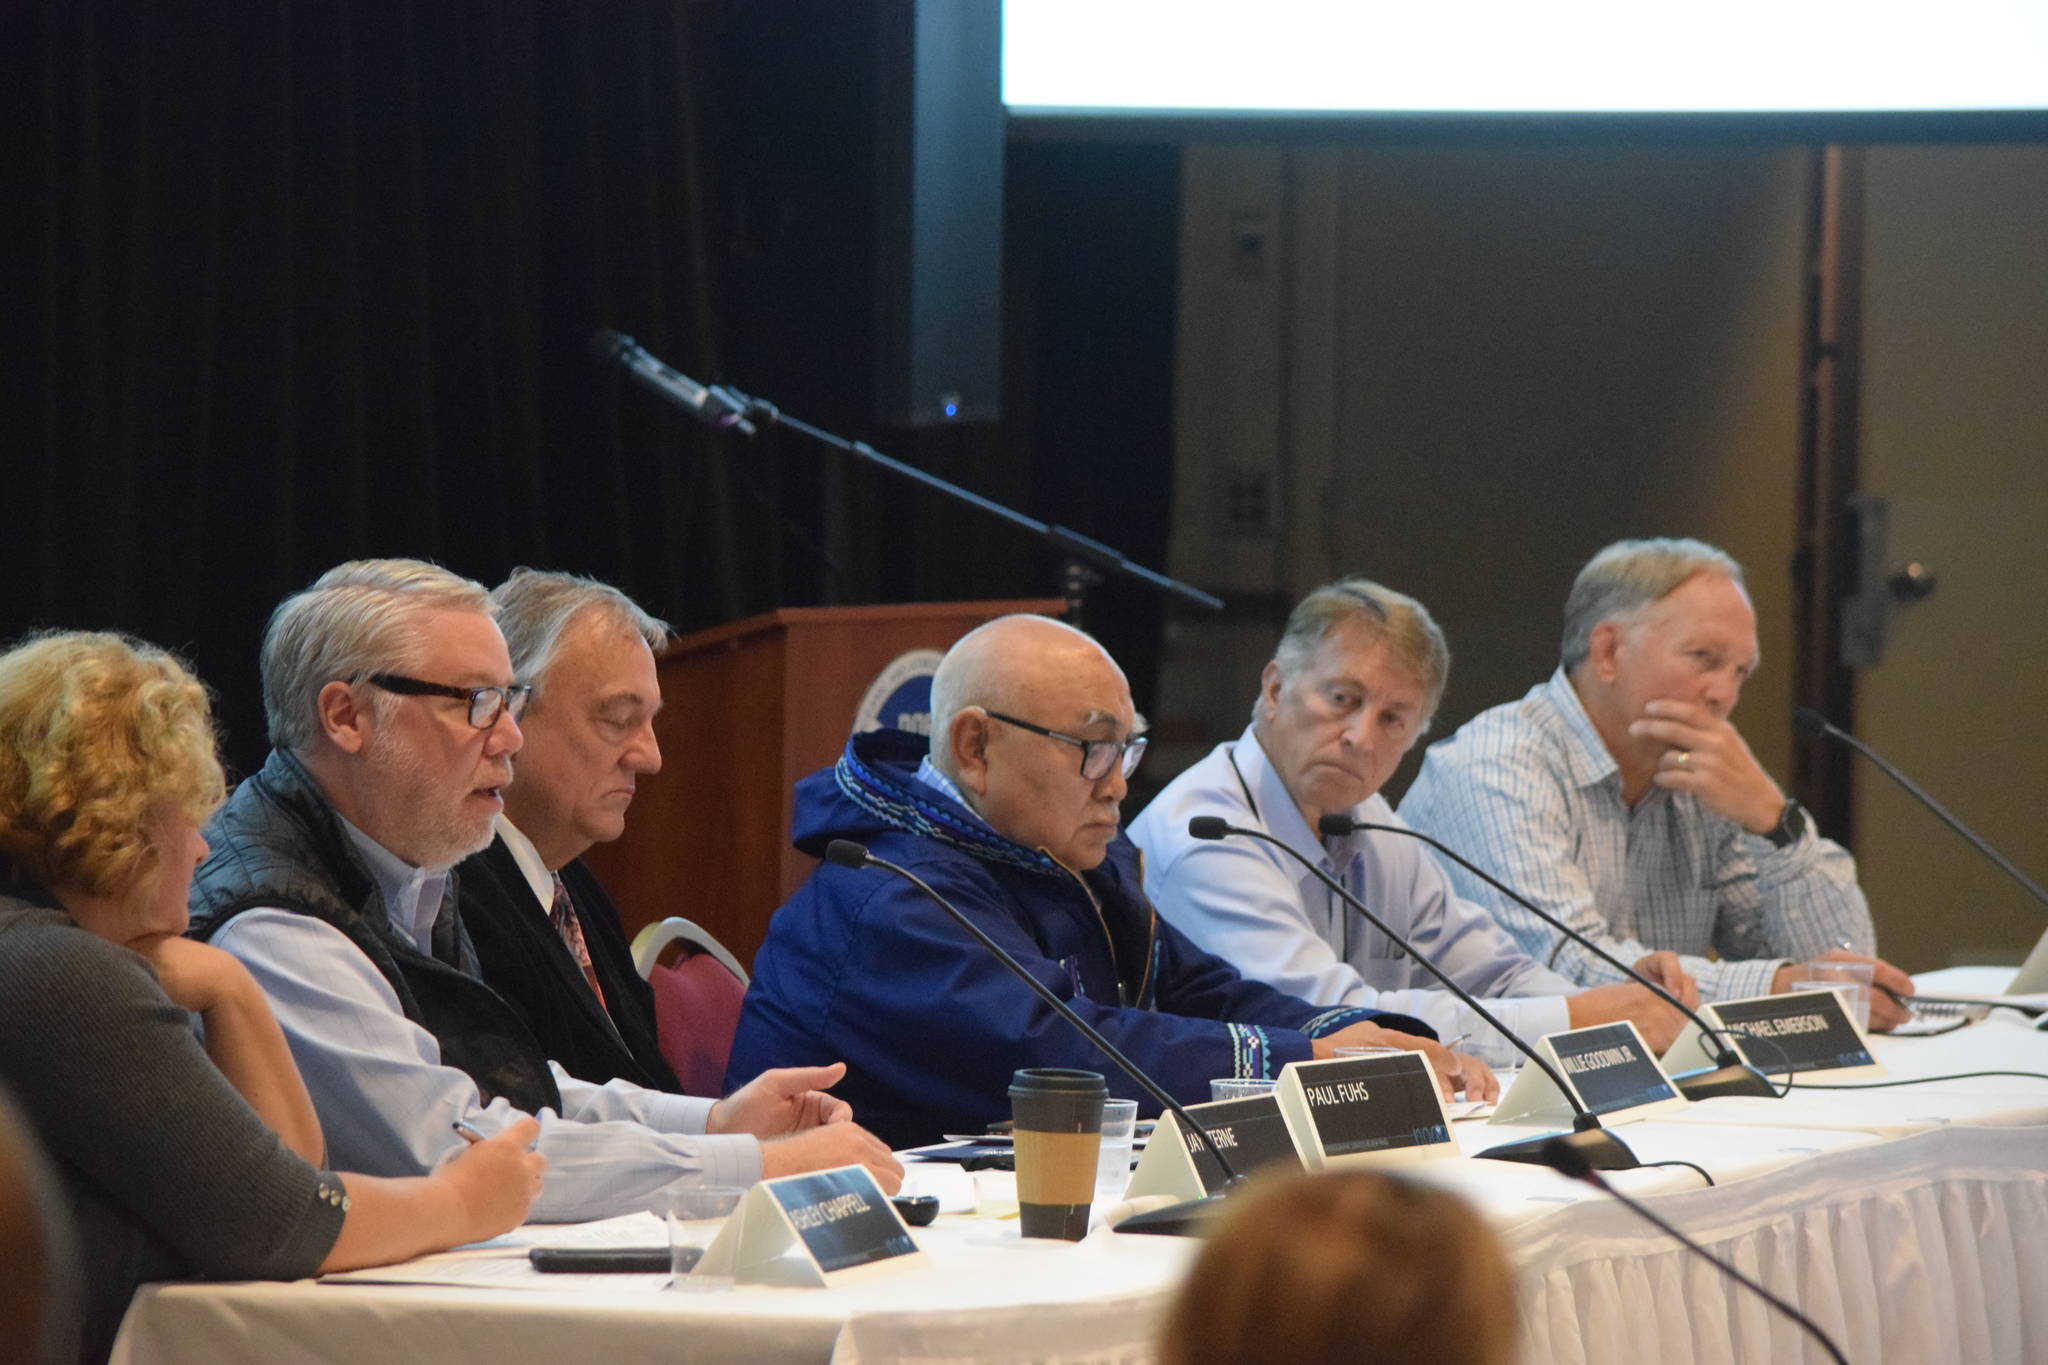 A panel of experts on Arctic issues convened in Juneau on Thursday at a meeting of the Hyrdographic Services Review Panel. (Kevin Gullufsen | Juneau Empire)